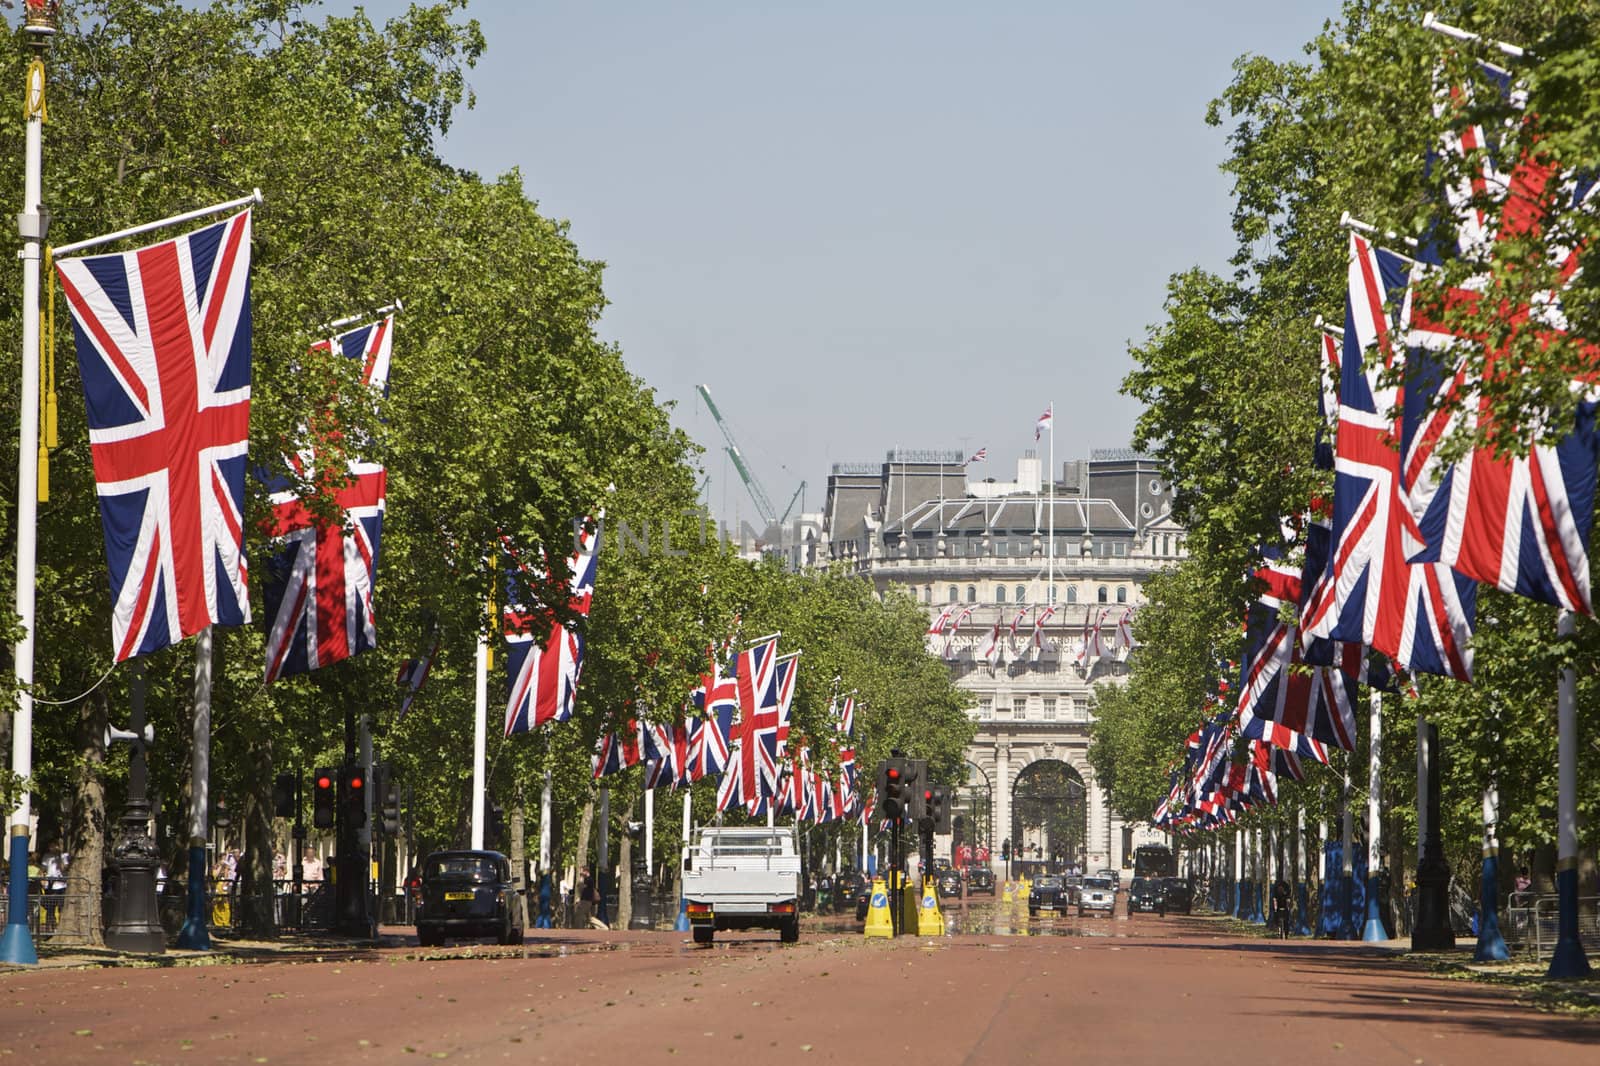 The Mall with flags leading to the entrance of the Buckingham Palace in London